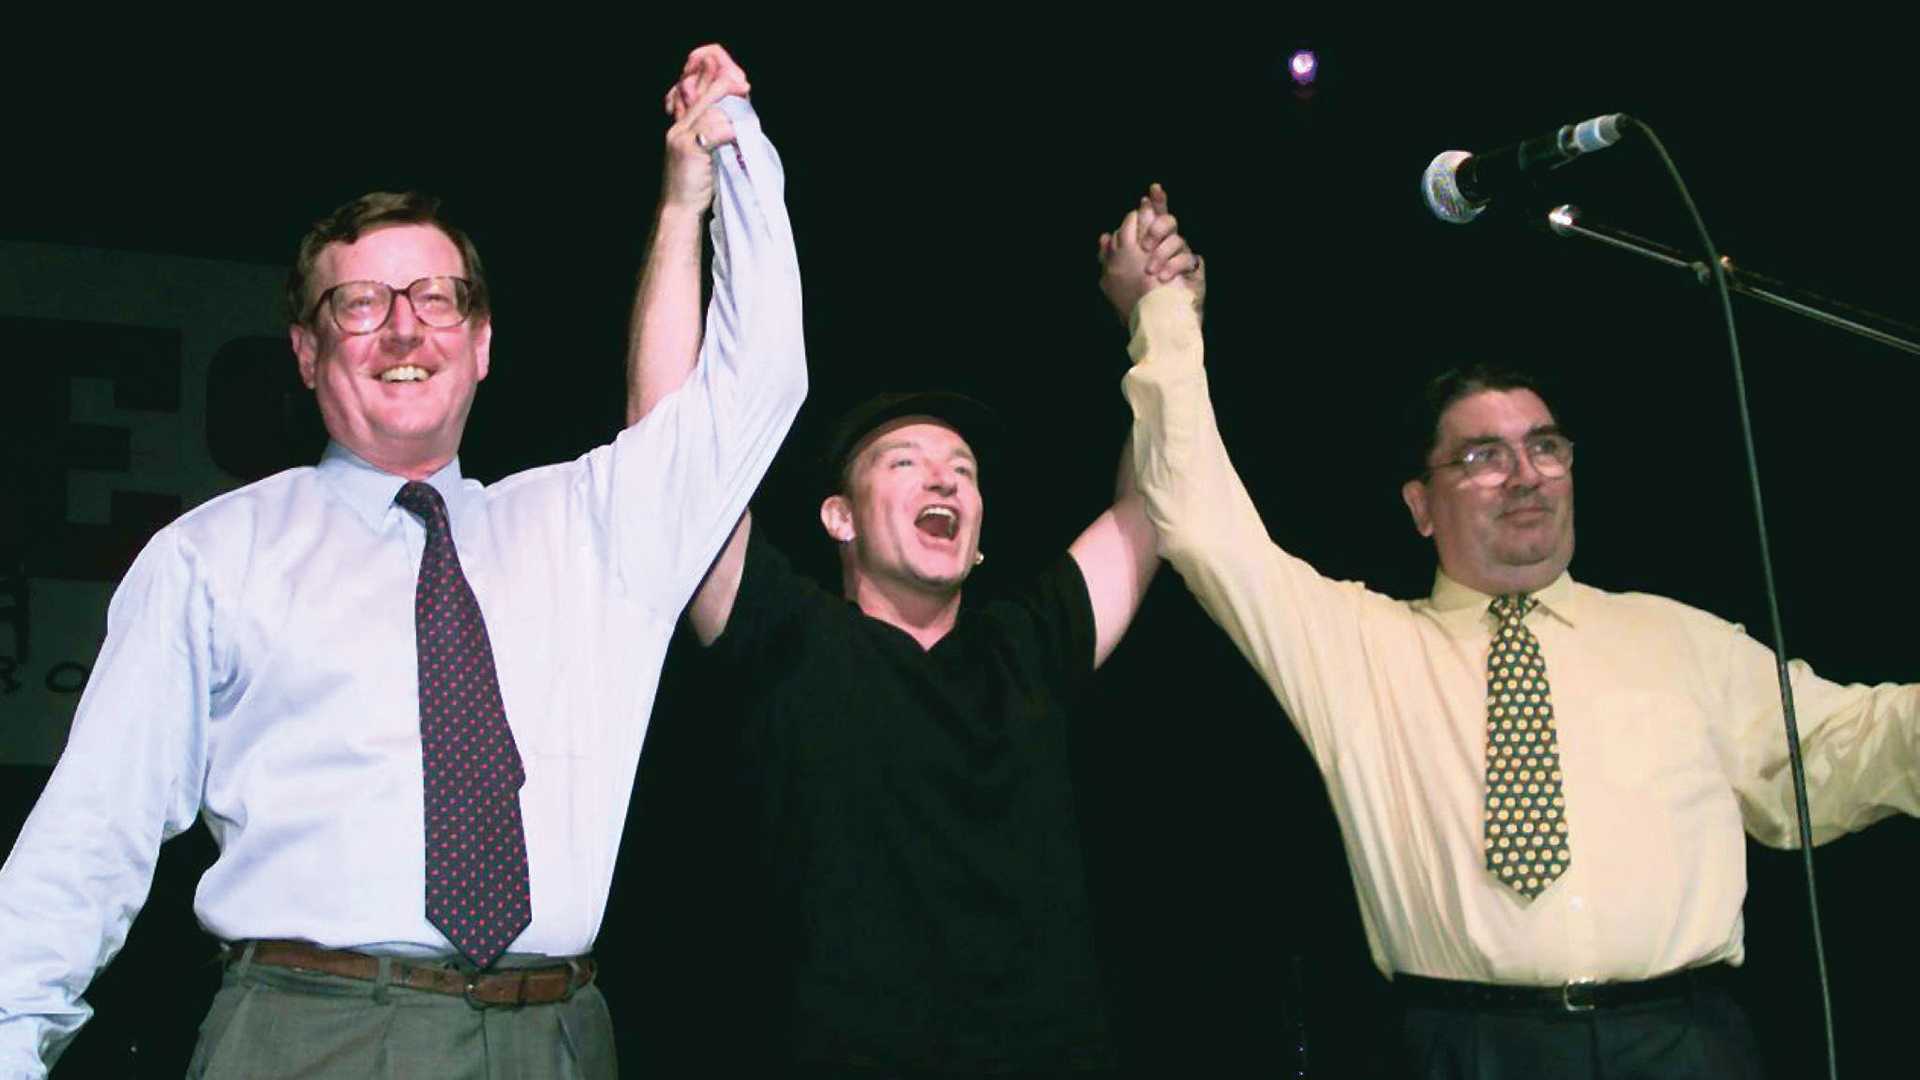 U2’s Bono backs the Good Friday Agreement with David Trimble and John Hume at the ‘Yes’ concert at Belfast Waterfront Hall, Northern Ireland, May 18, 1998. Image: Gerry Penny / Shutterstock